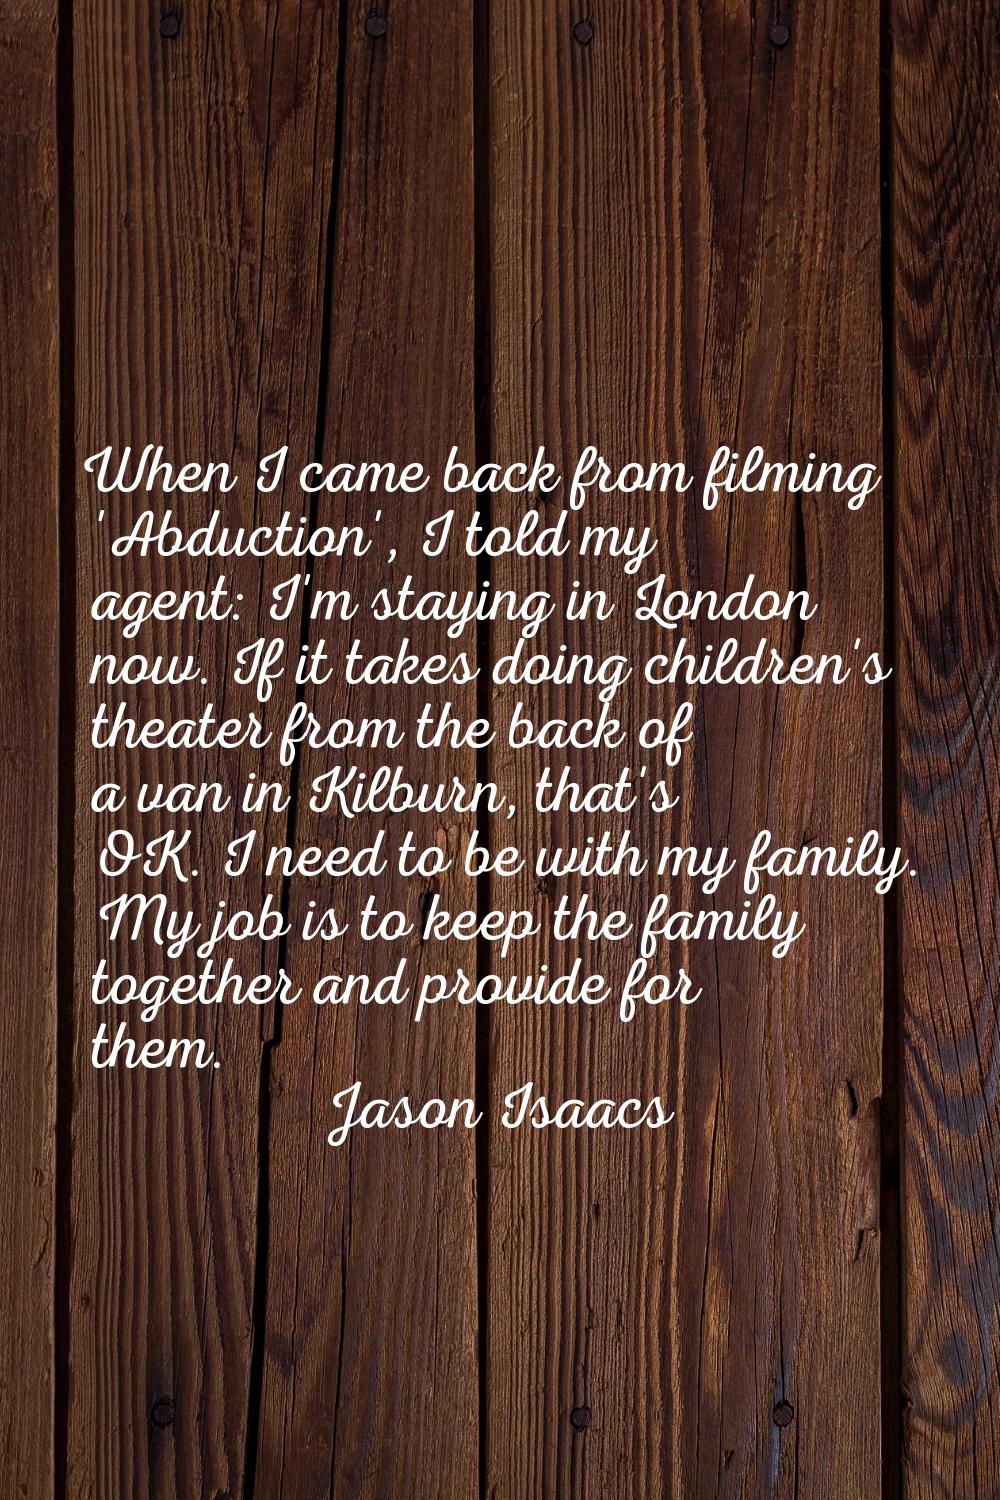 When I came back from filming 'Abduction', I told my agent: I'm staying in London now. If it takes 